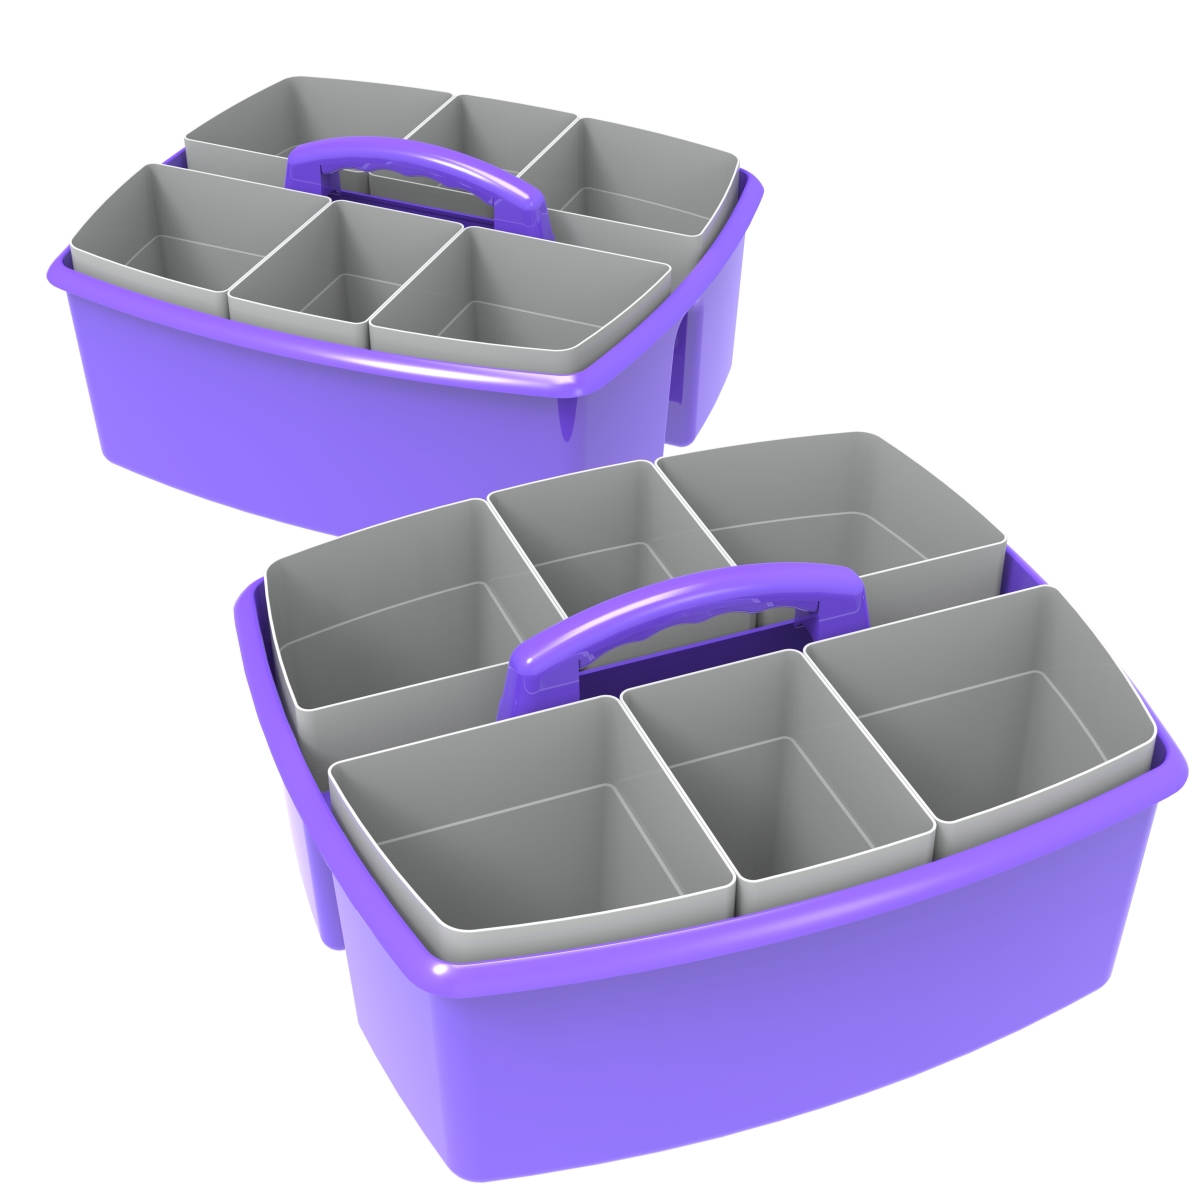 Picture of Storex 00986U02C Large Caddy with Sorting Cups, Purple - Pack of 2